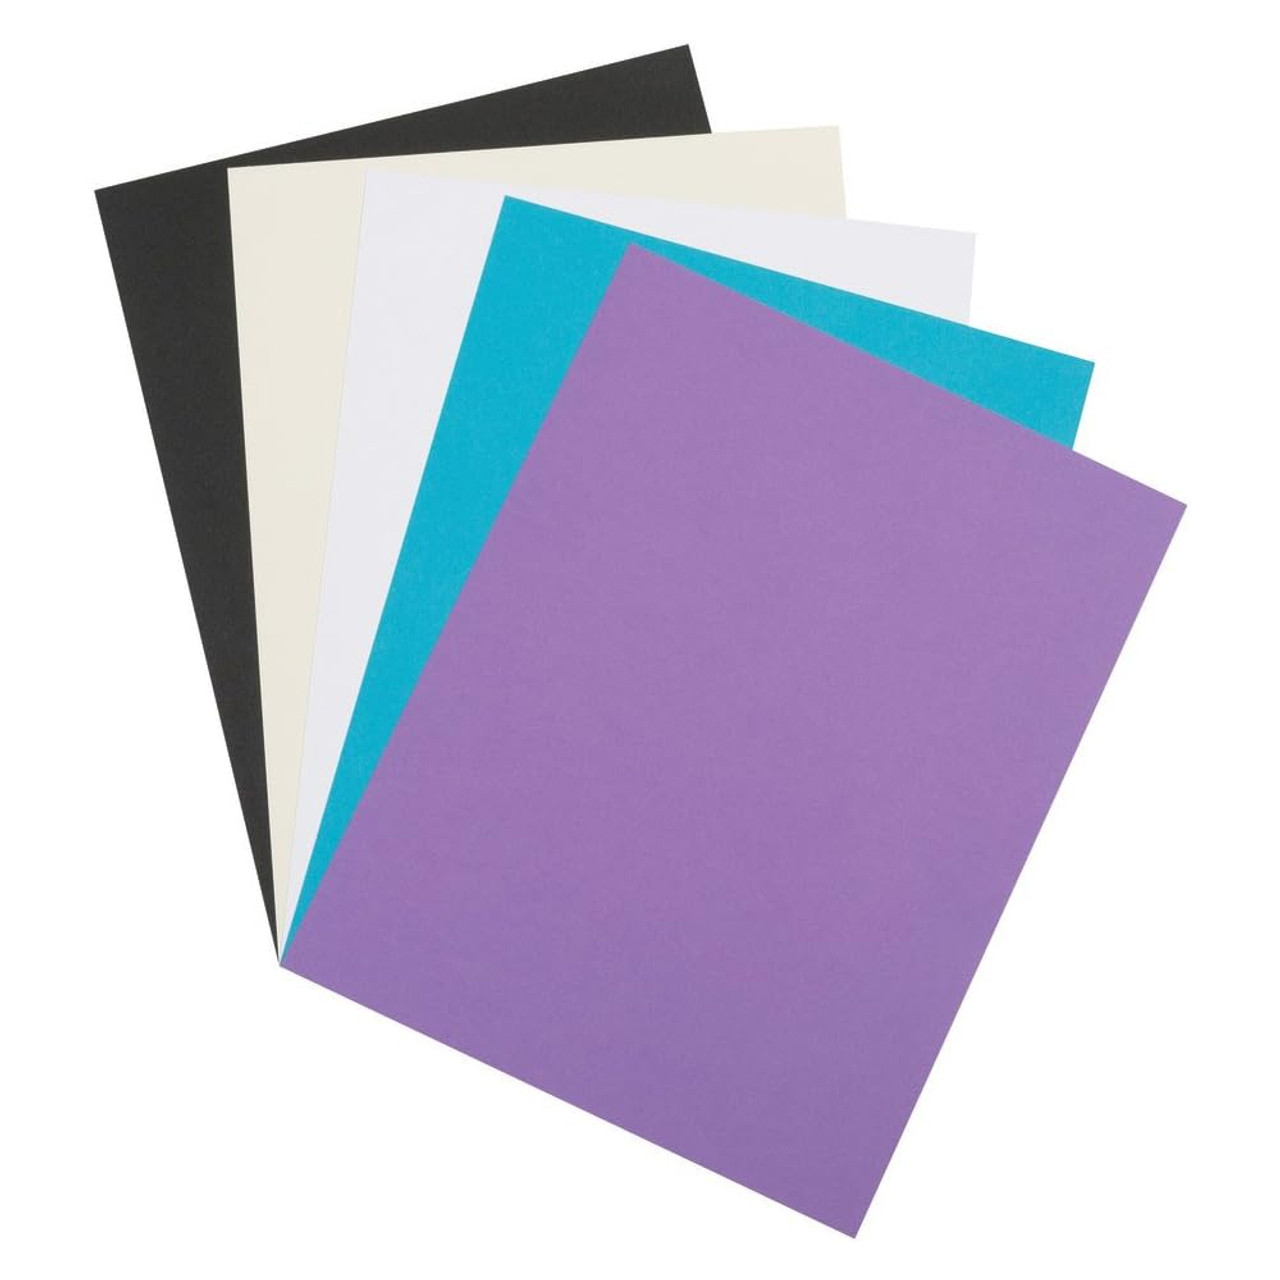 Pacon Array Card Stock Classic Colors 100